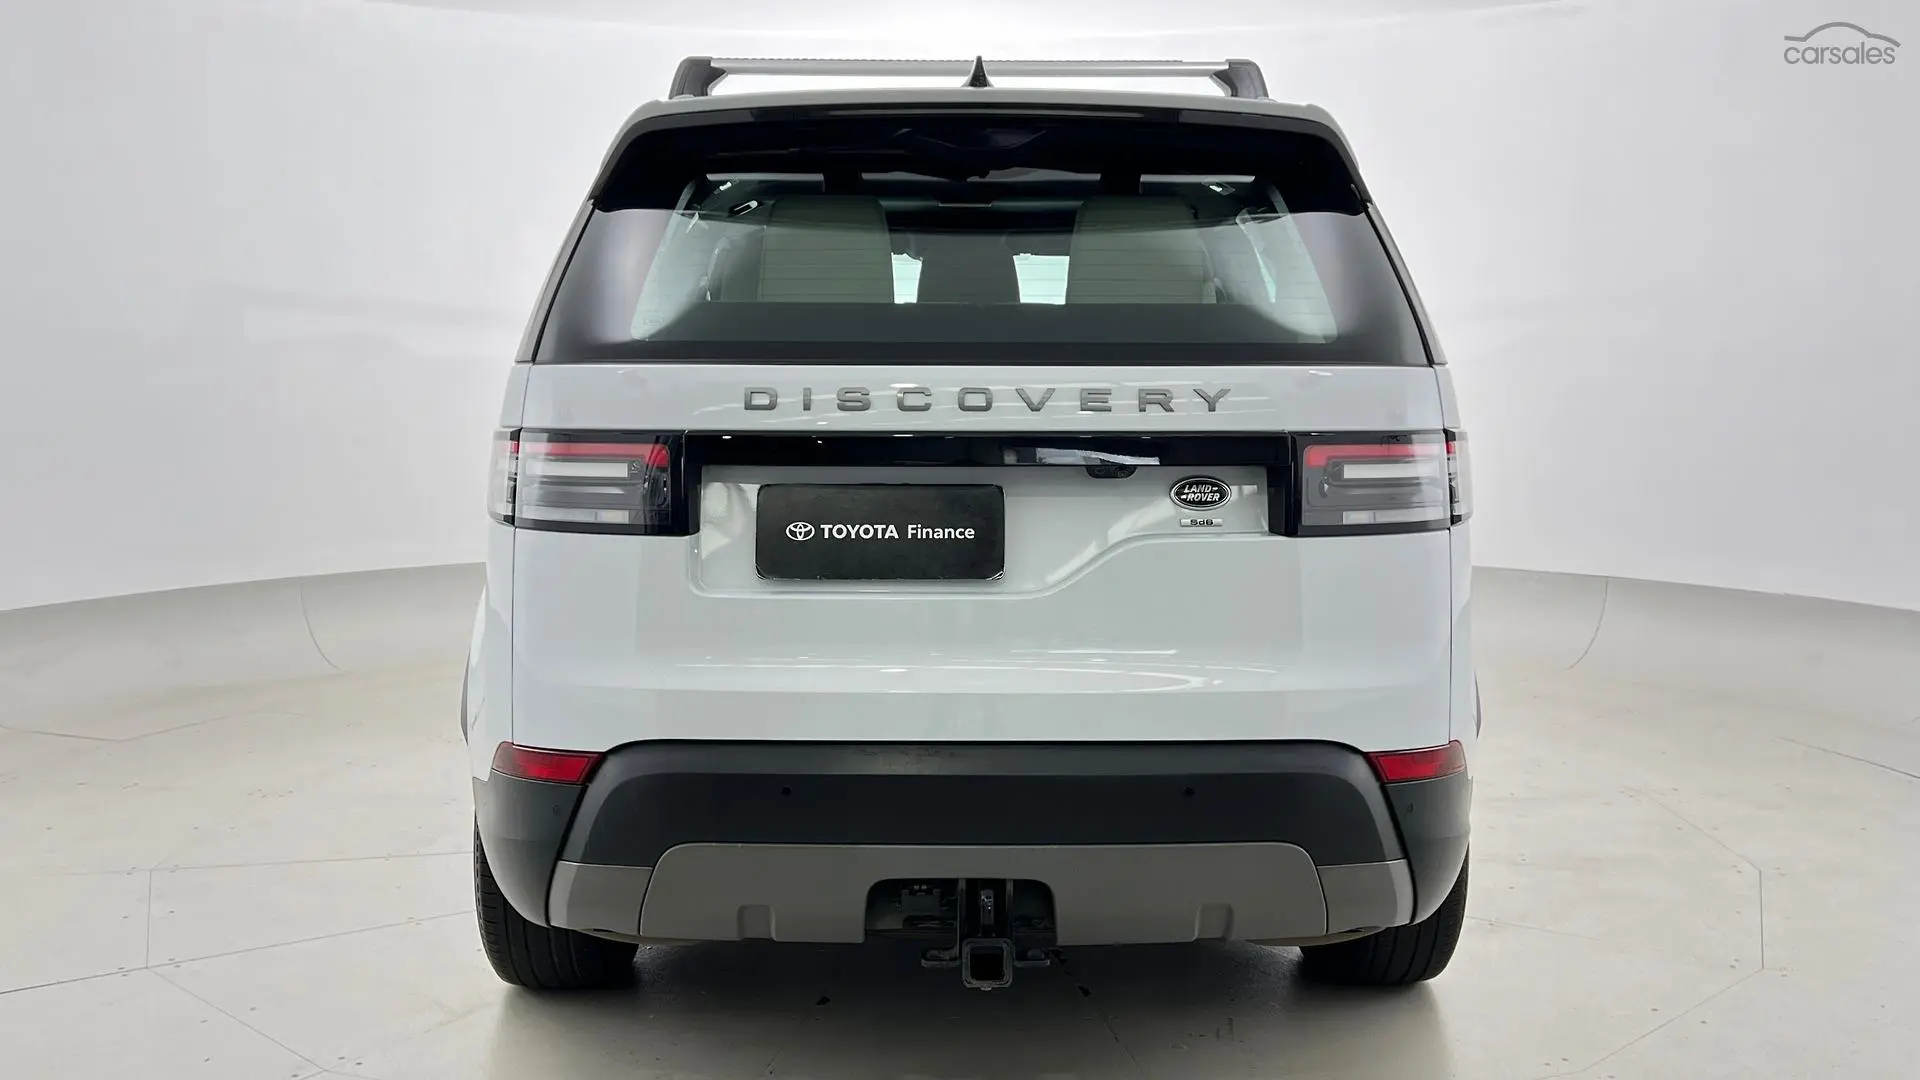 2019 Land Rover Discovery Image 11